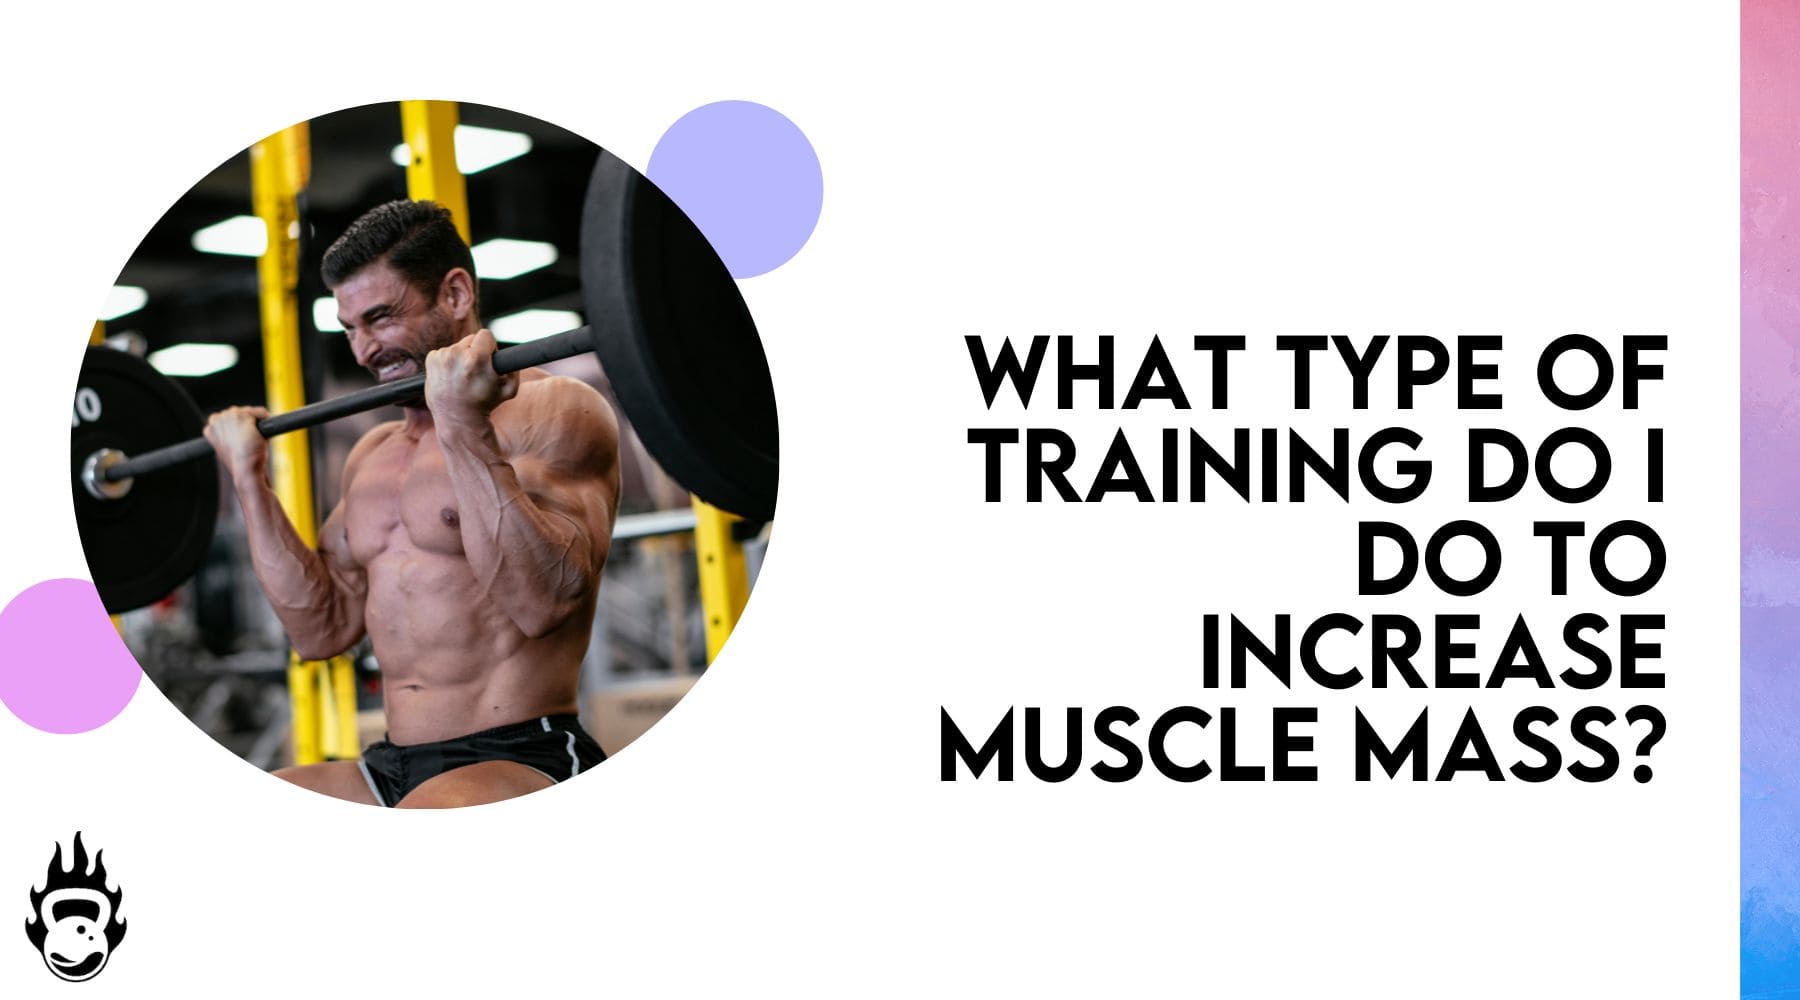 Type Of Training To Increase Muscle Mass